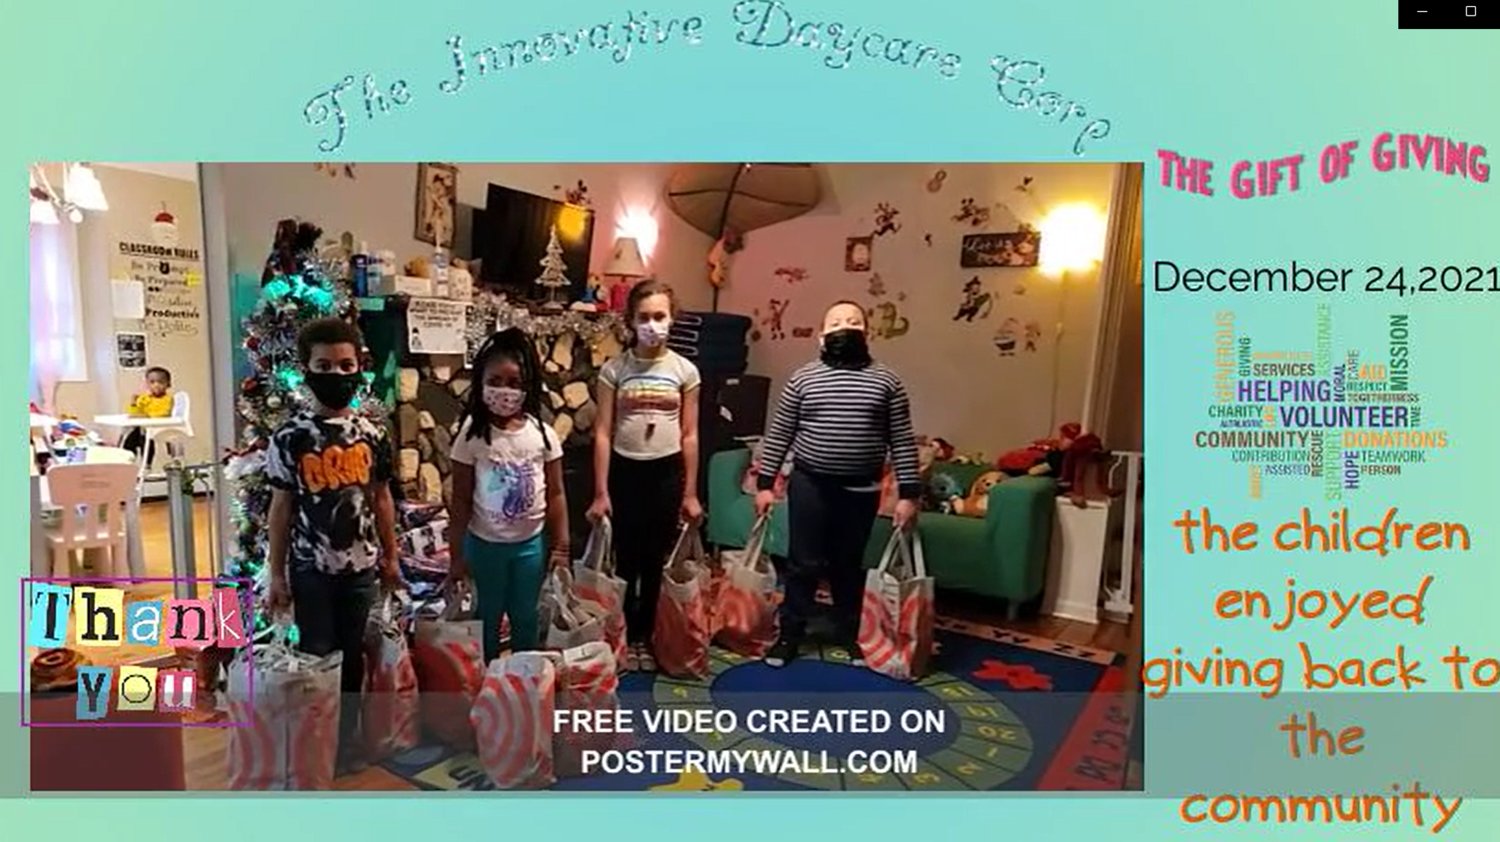 The school-aged children at the Innovative Daycare Corp created a video to tell about their donations and express holiday greetings.